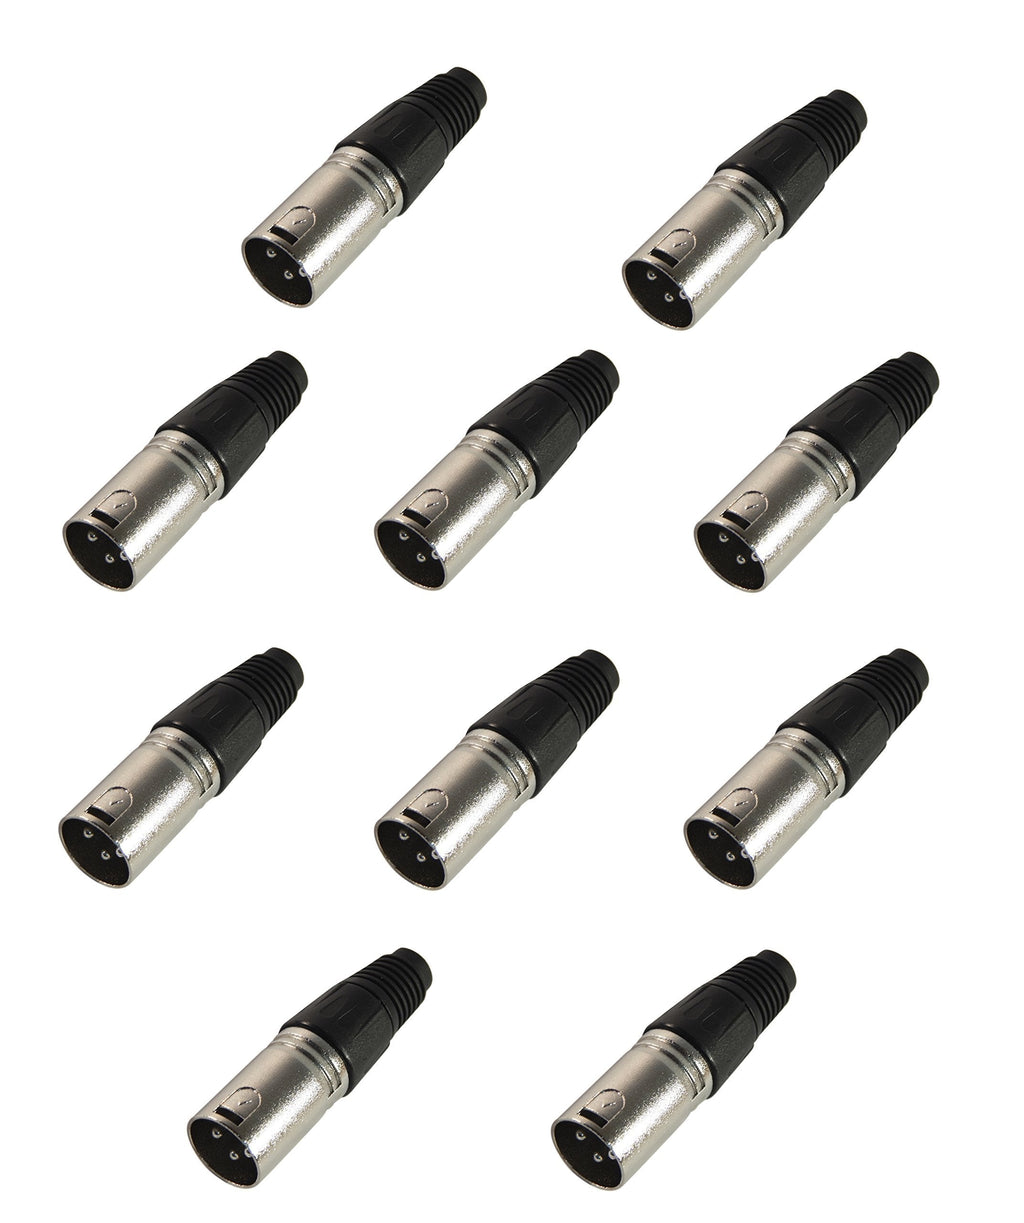 [AUSTRALIA] - YCS Basics Wire Your Own Solder Type XLR Male Connector, 10 Pack 